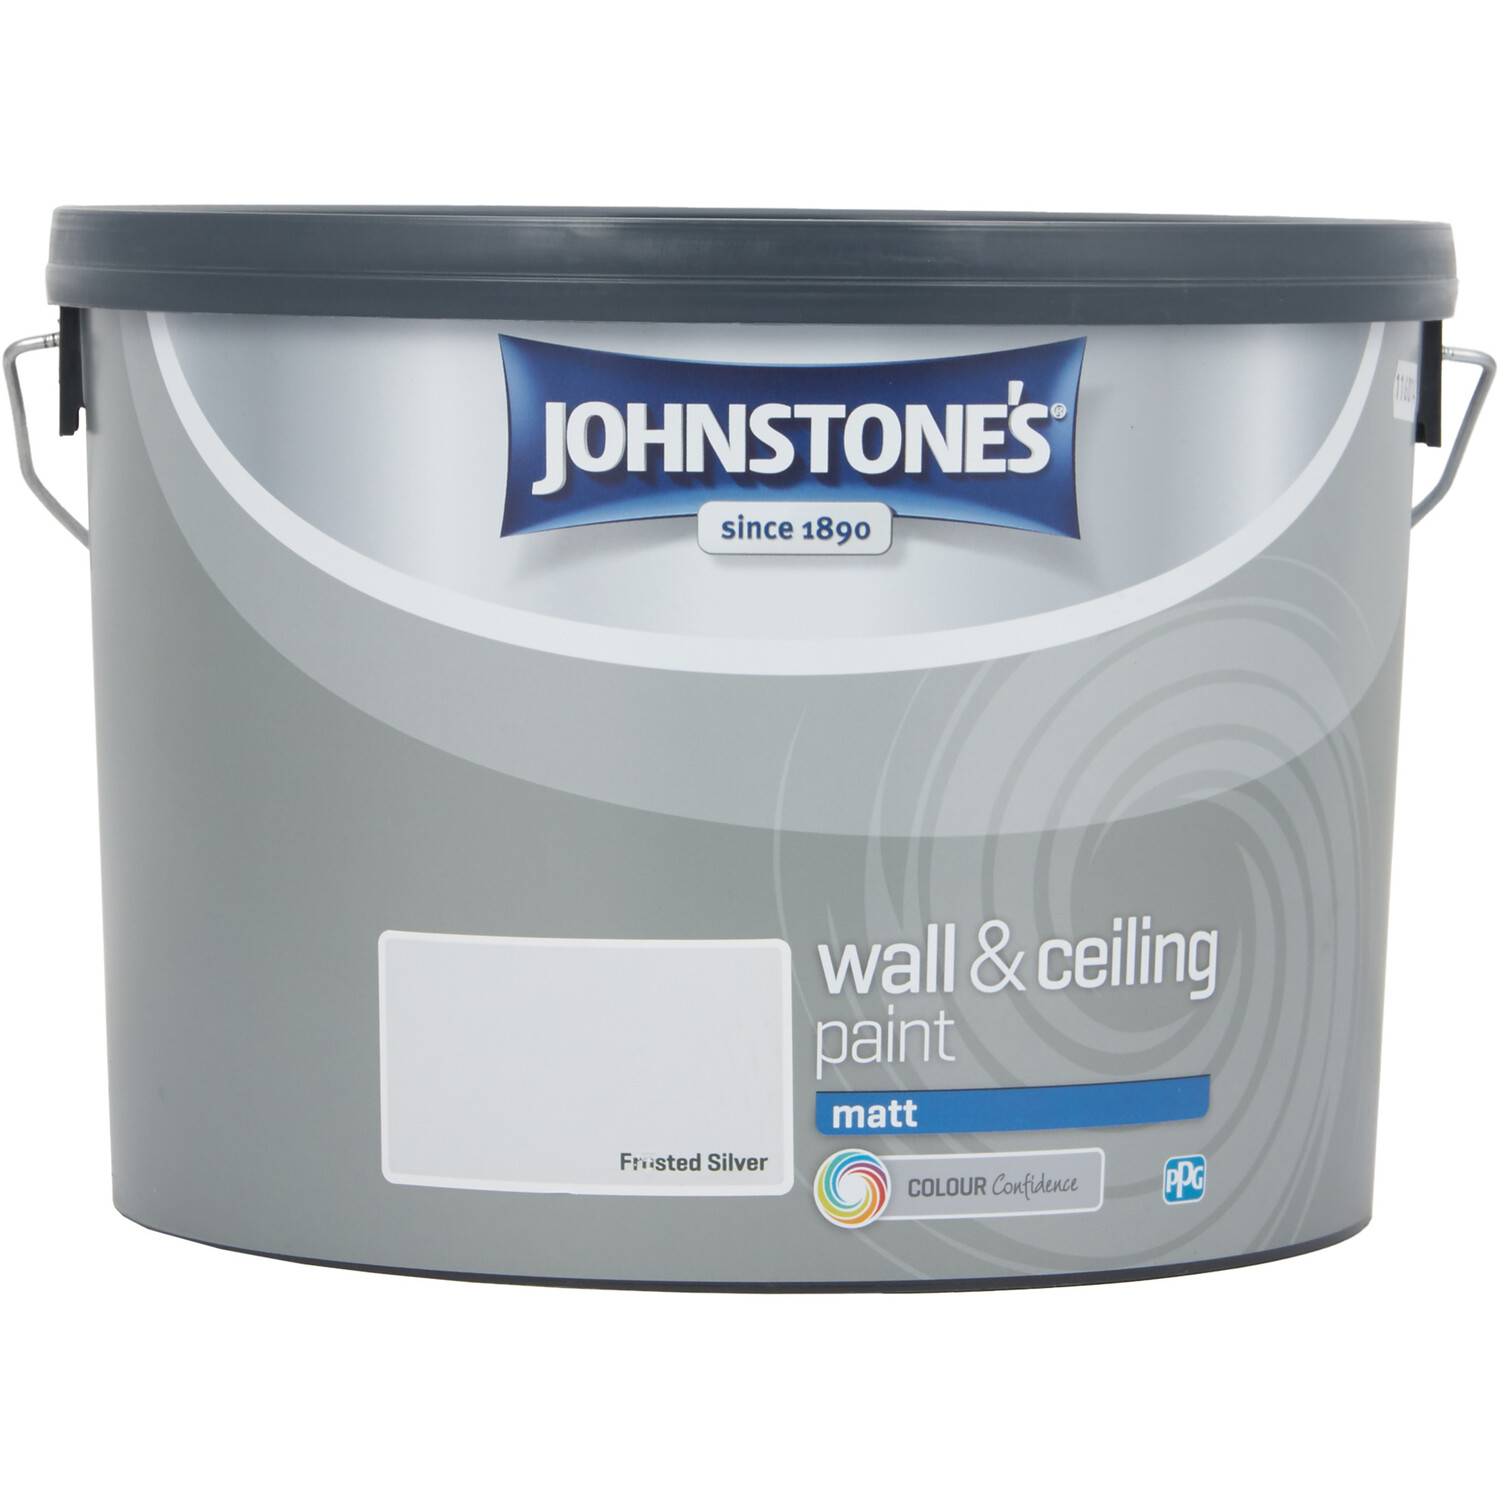 Johnstones Wall and Ceiling Paint Matt 10L - Frosted Silver Image 2